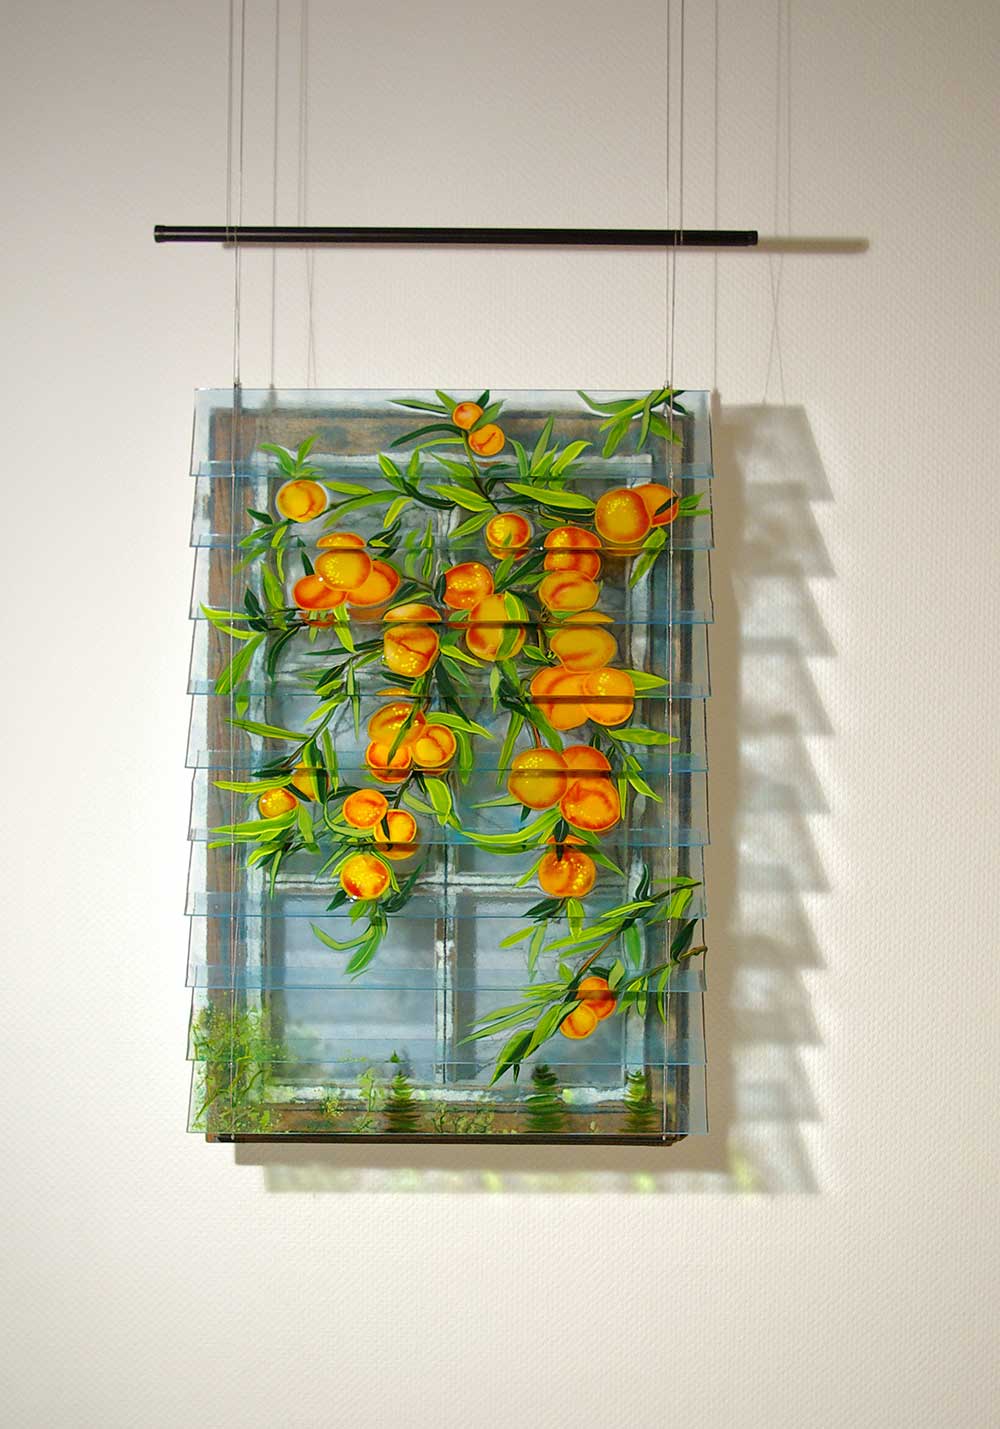 In front of an old wooden window, mounted on the wall, there is a blind made of colored melted glass. The glass slats show peach fruits and branches of a tree. Front view